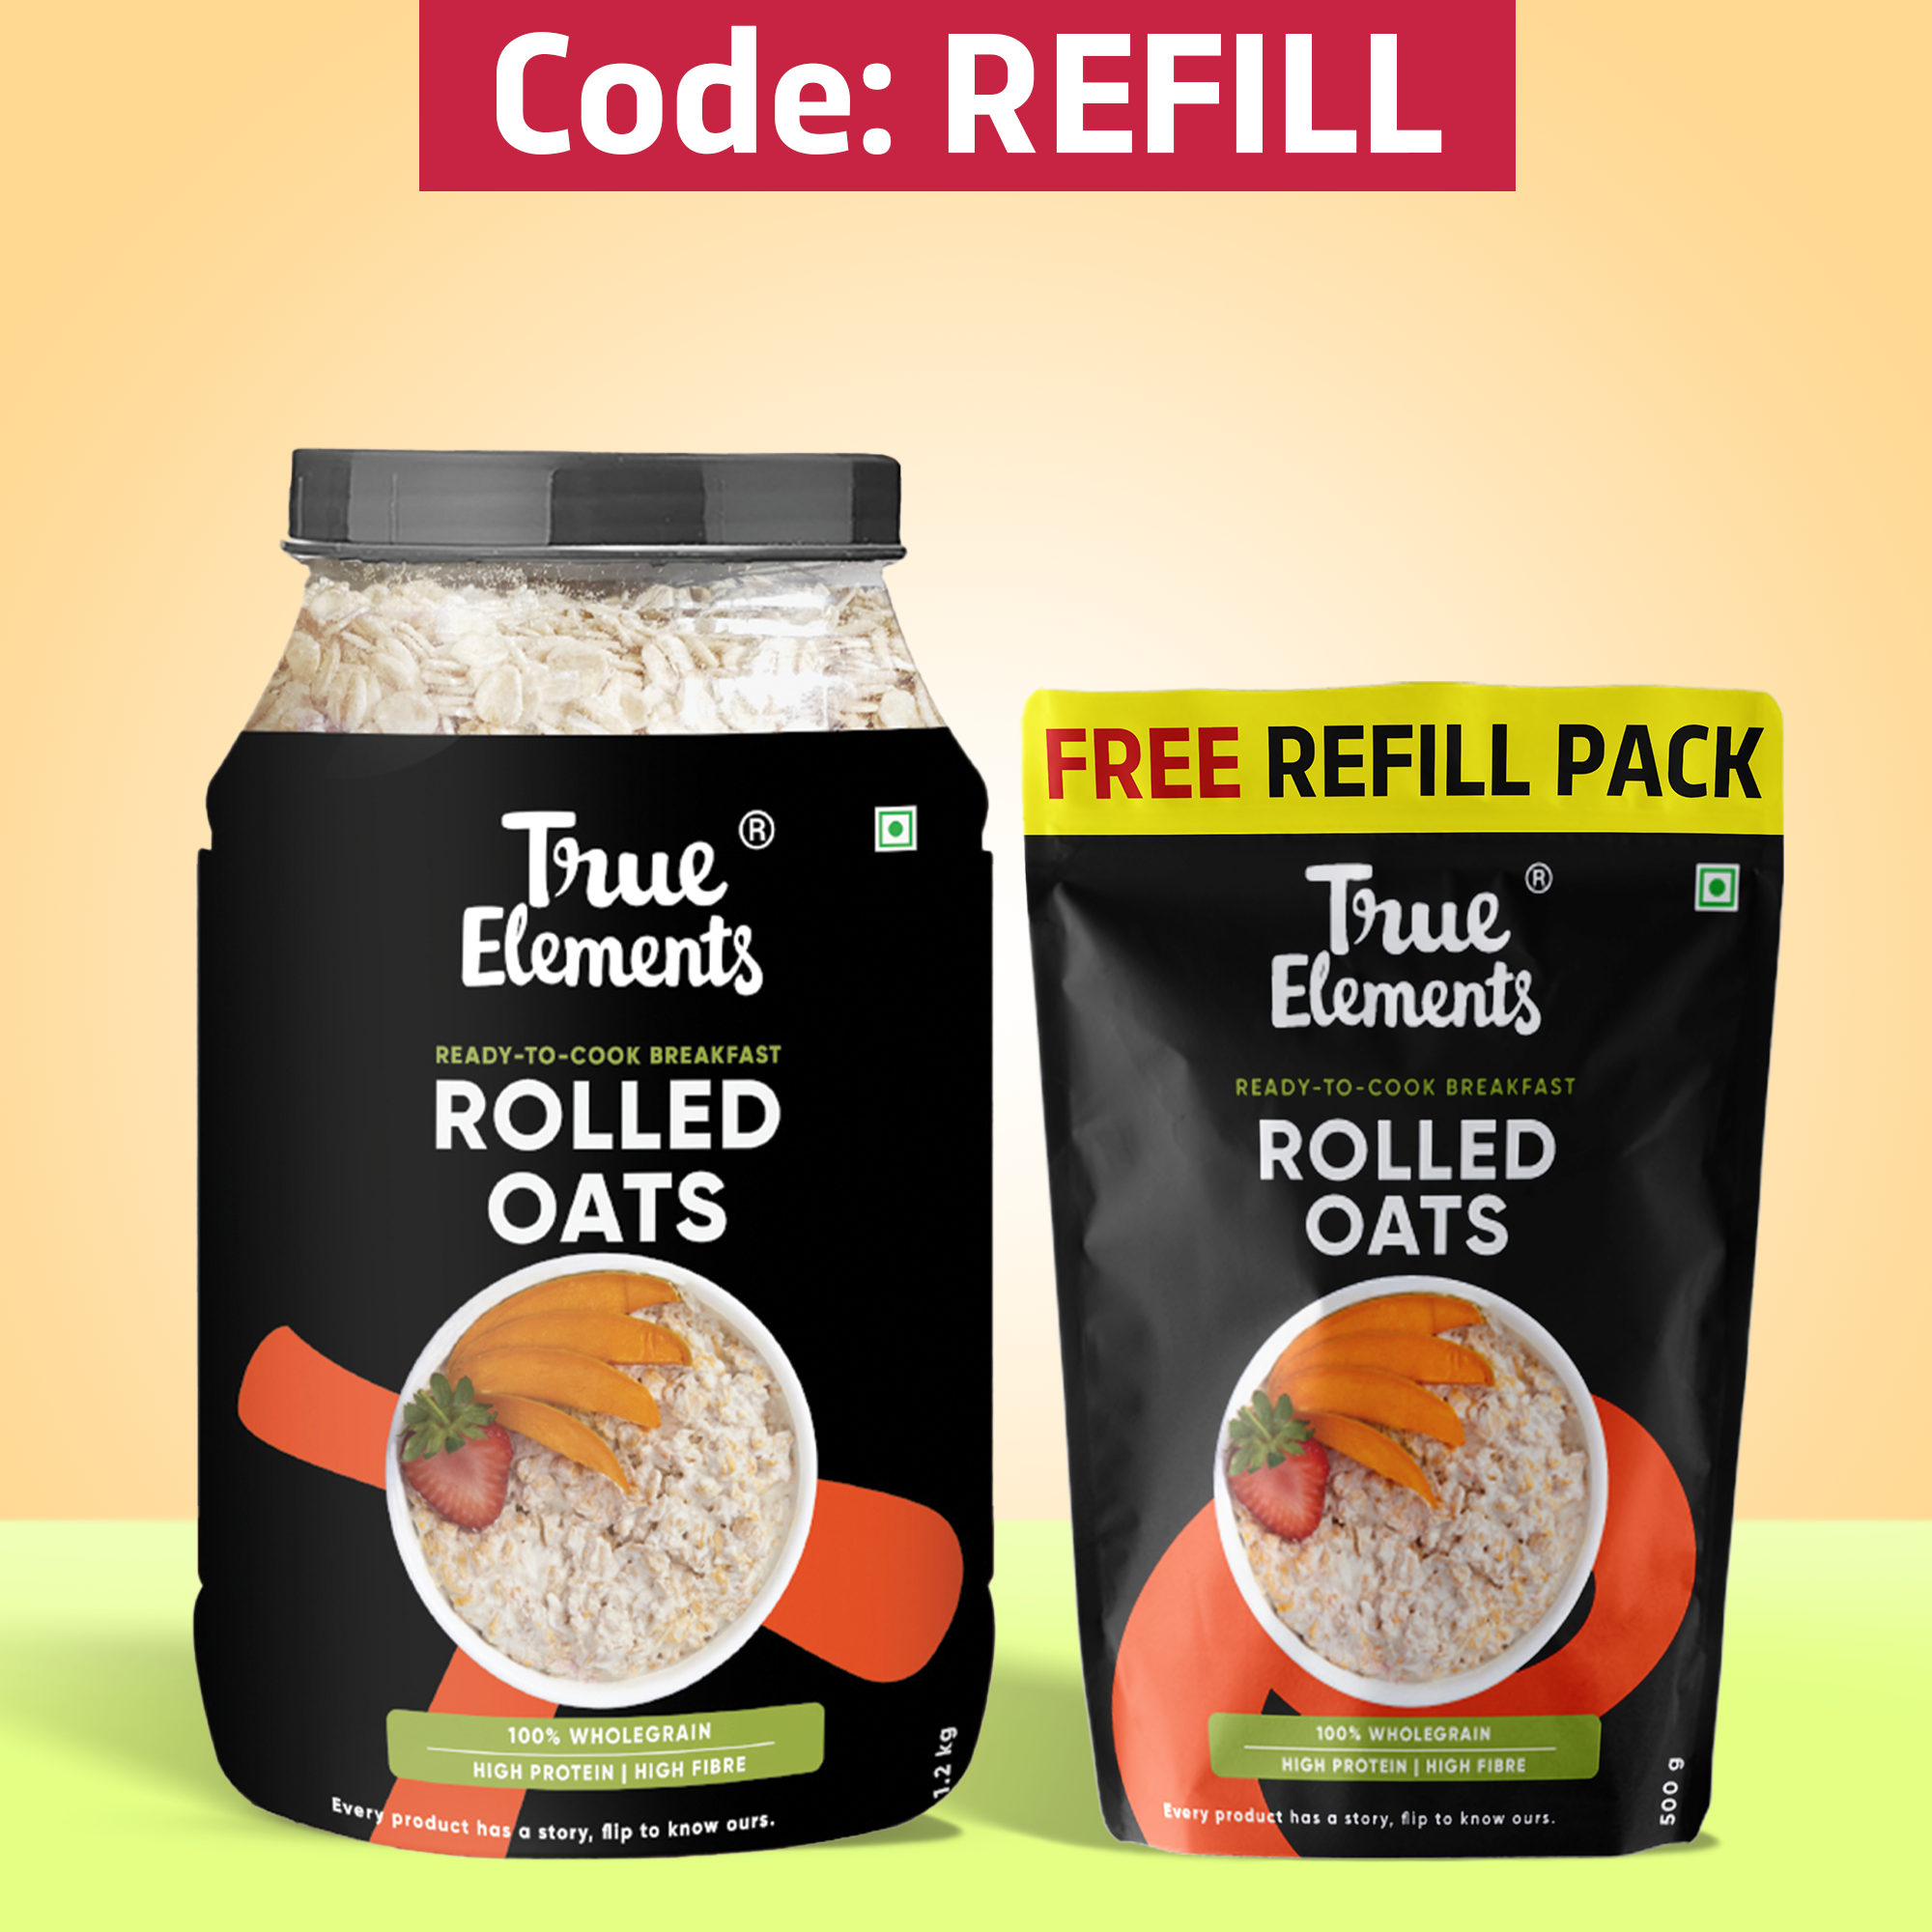 Rolled-oats-1.2kg-with-refill-pack-500g-free-on-code-REFILL